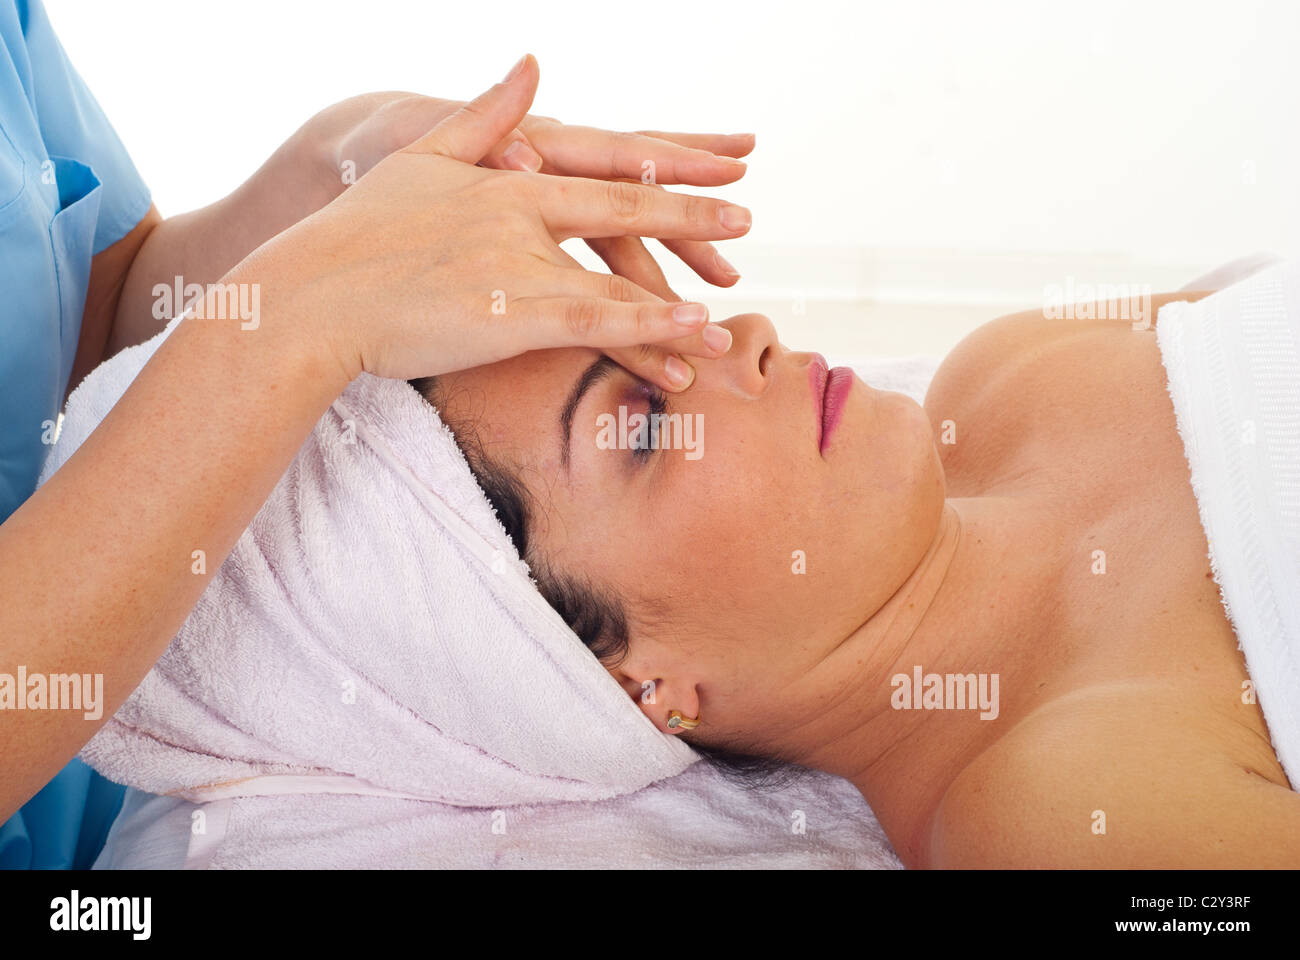 Woman receiving a relaxation facial massage at spa salon Stock Photo